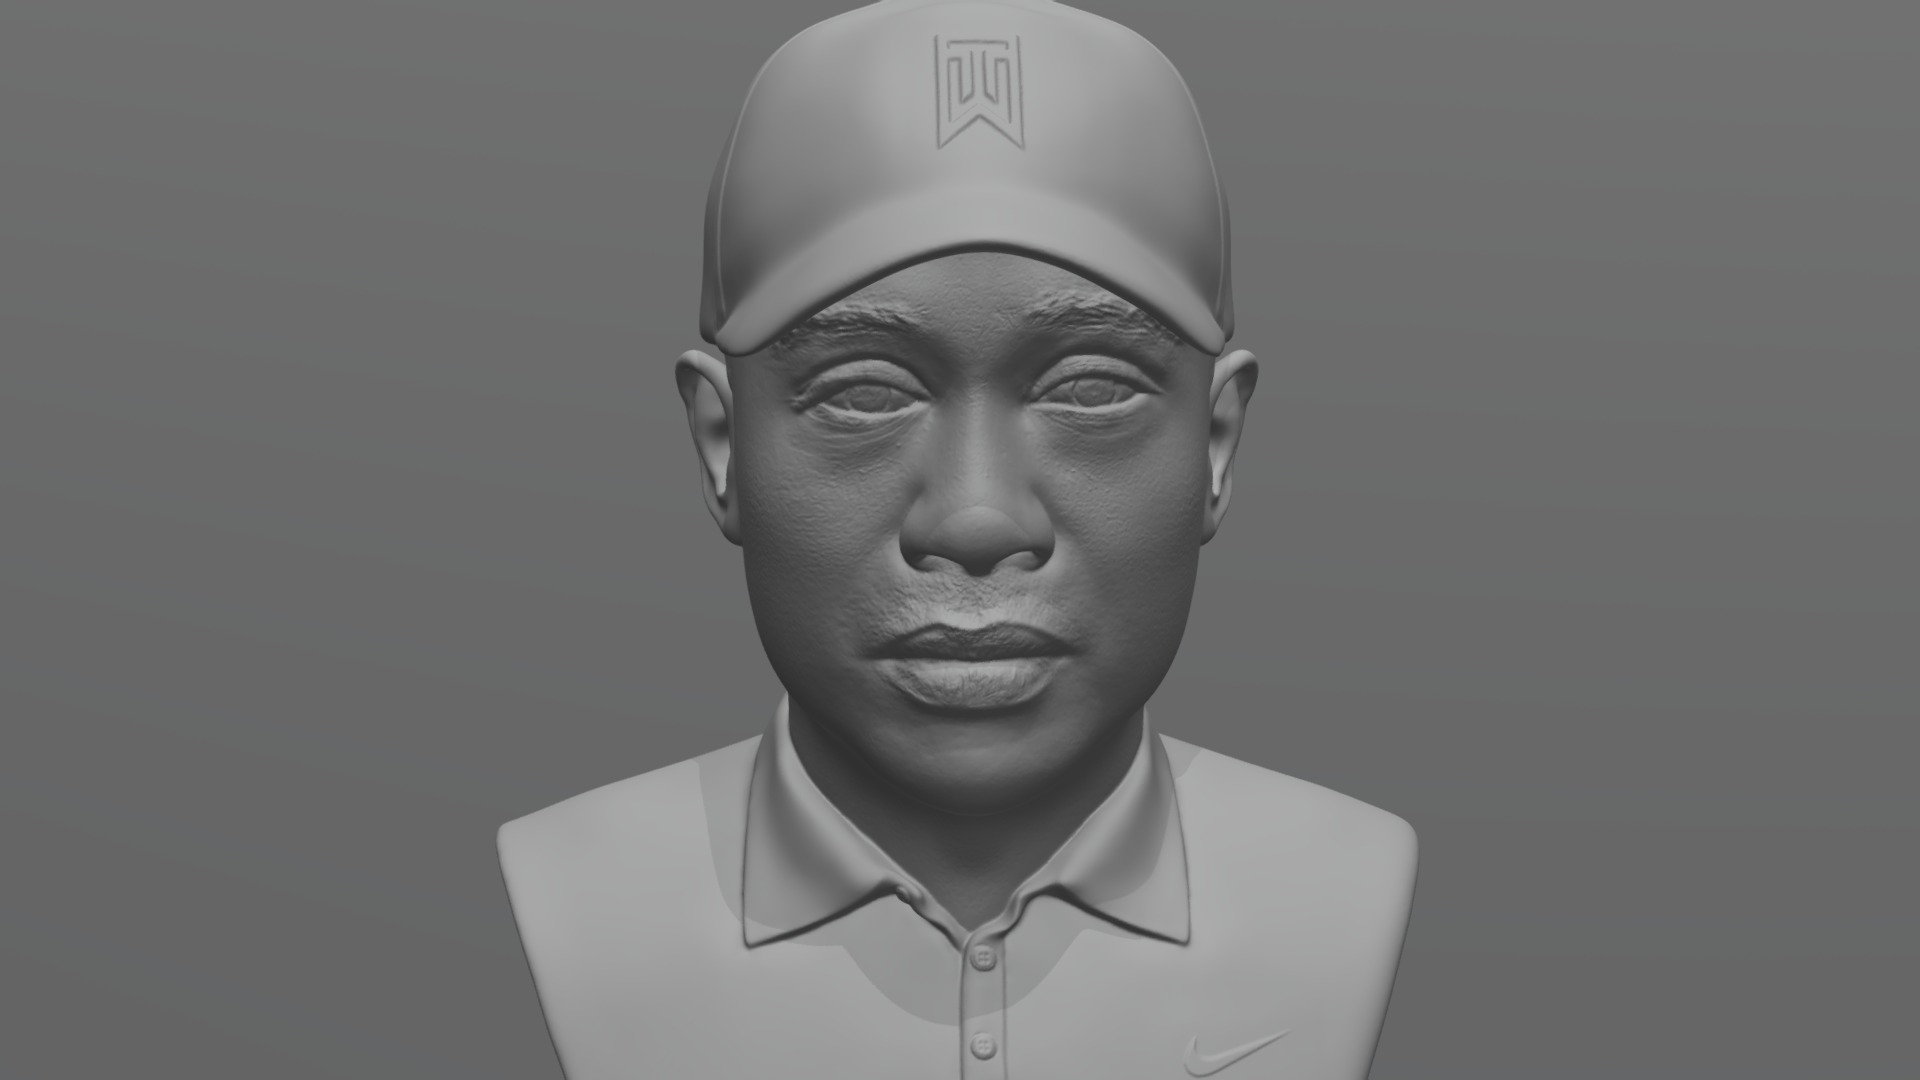 3D model Tiger Woods bust for 3D printing - This is a 3D model of the Tiger Woods bust for 3D printing. The 3D model is about a man wearing a white hat.